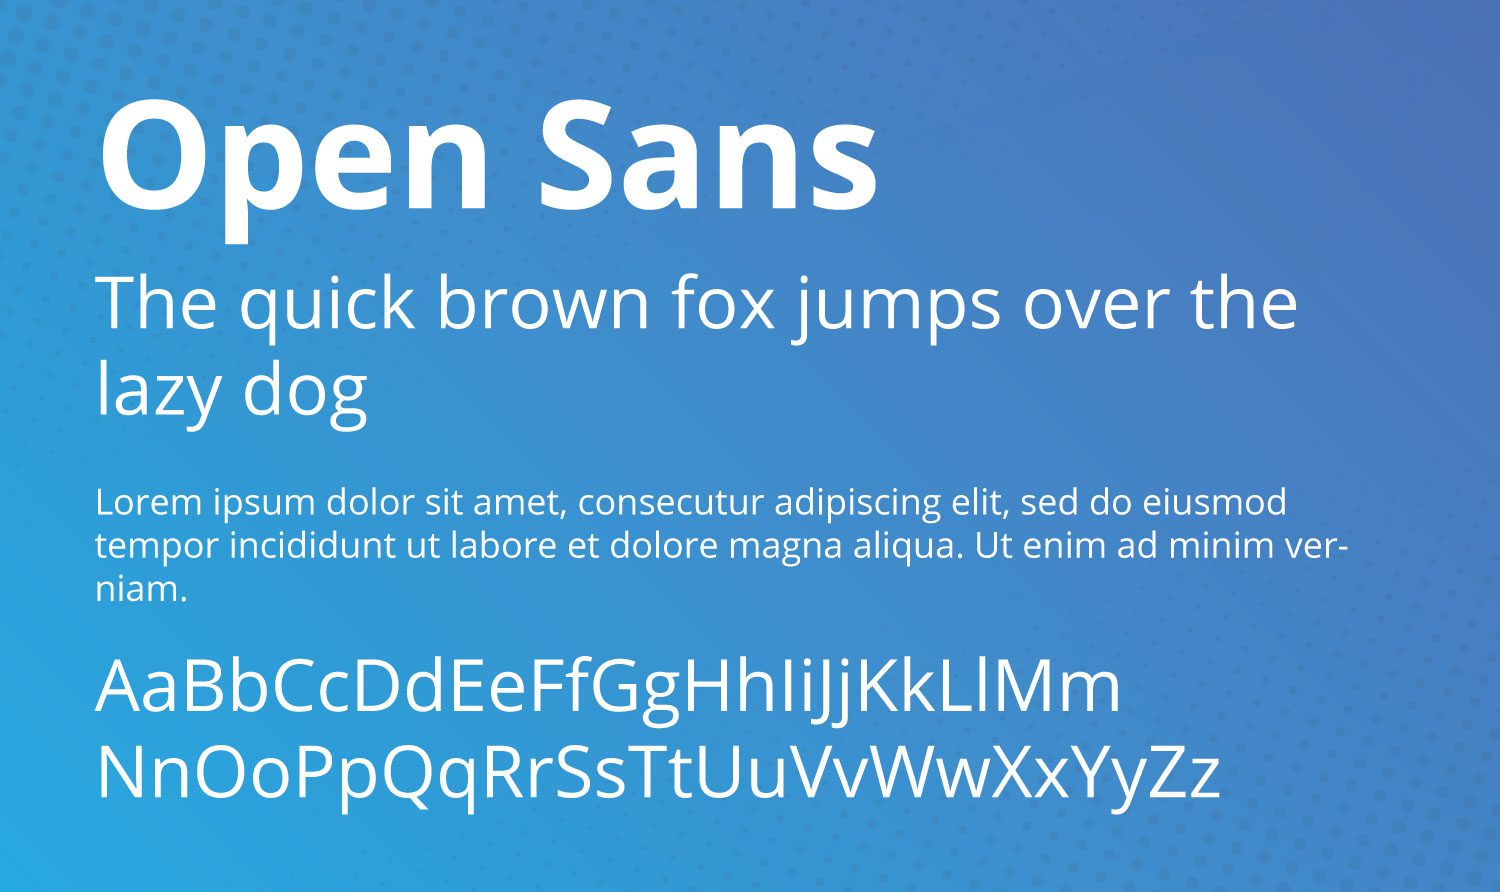 How To Identify Fonts on Webpage (12 Best Chrome Extensions)